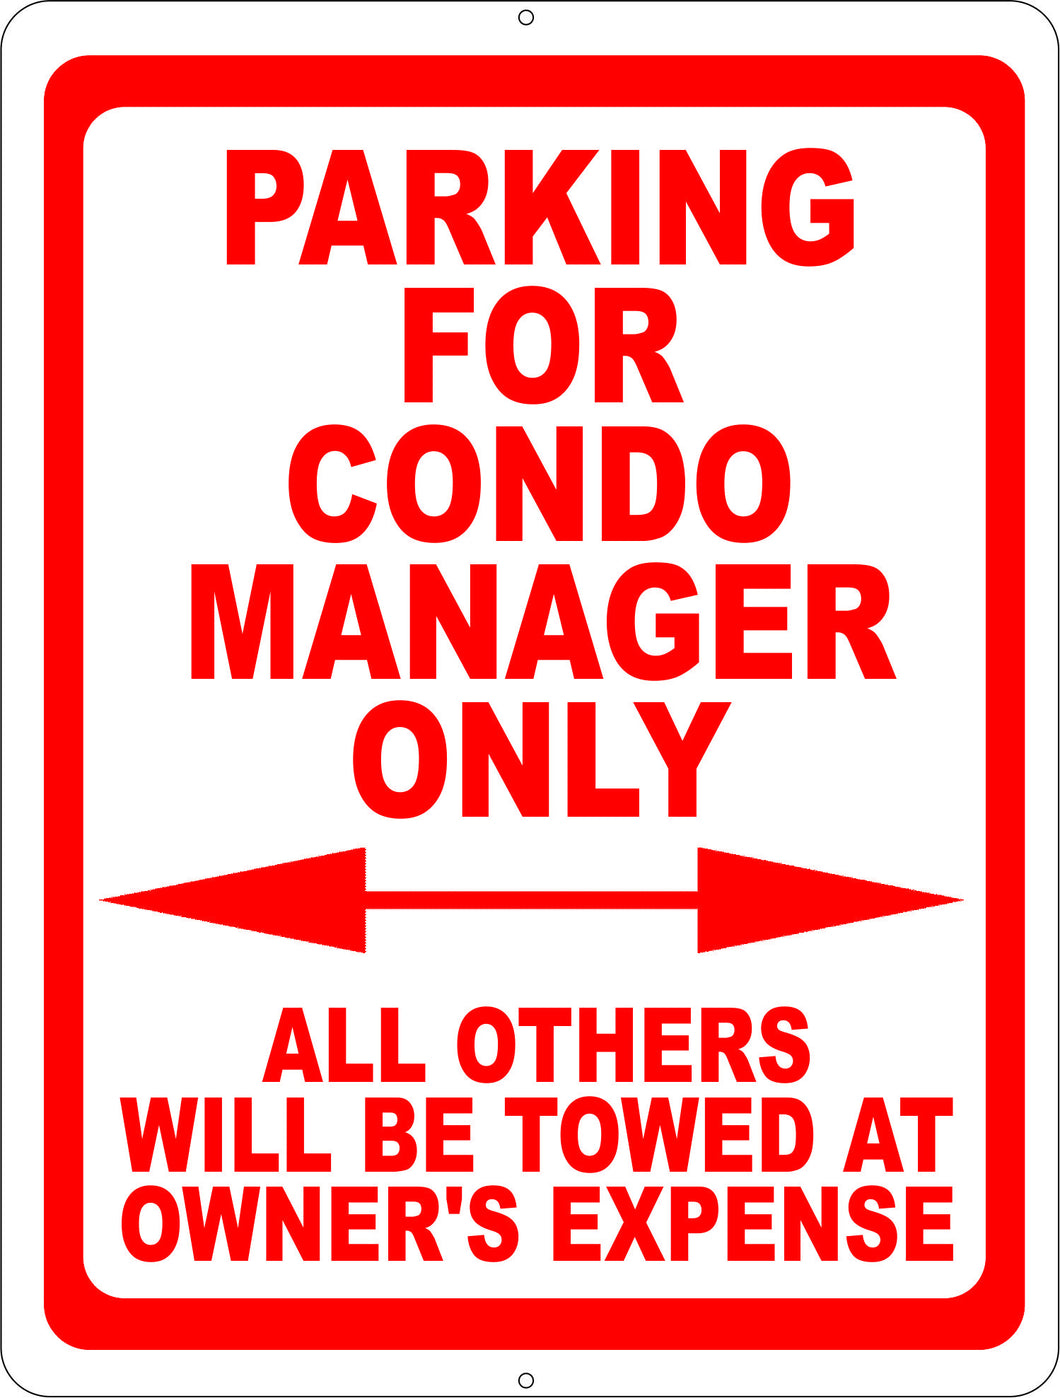 Parking for Condo Manager Only All Others Towed at Owners Expense Sign - Signs & Decals by SalaGraphics